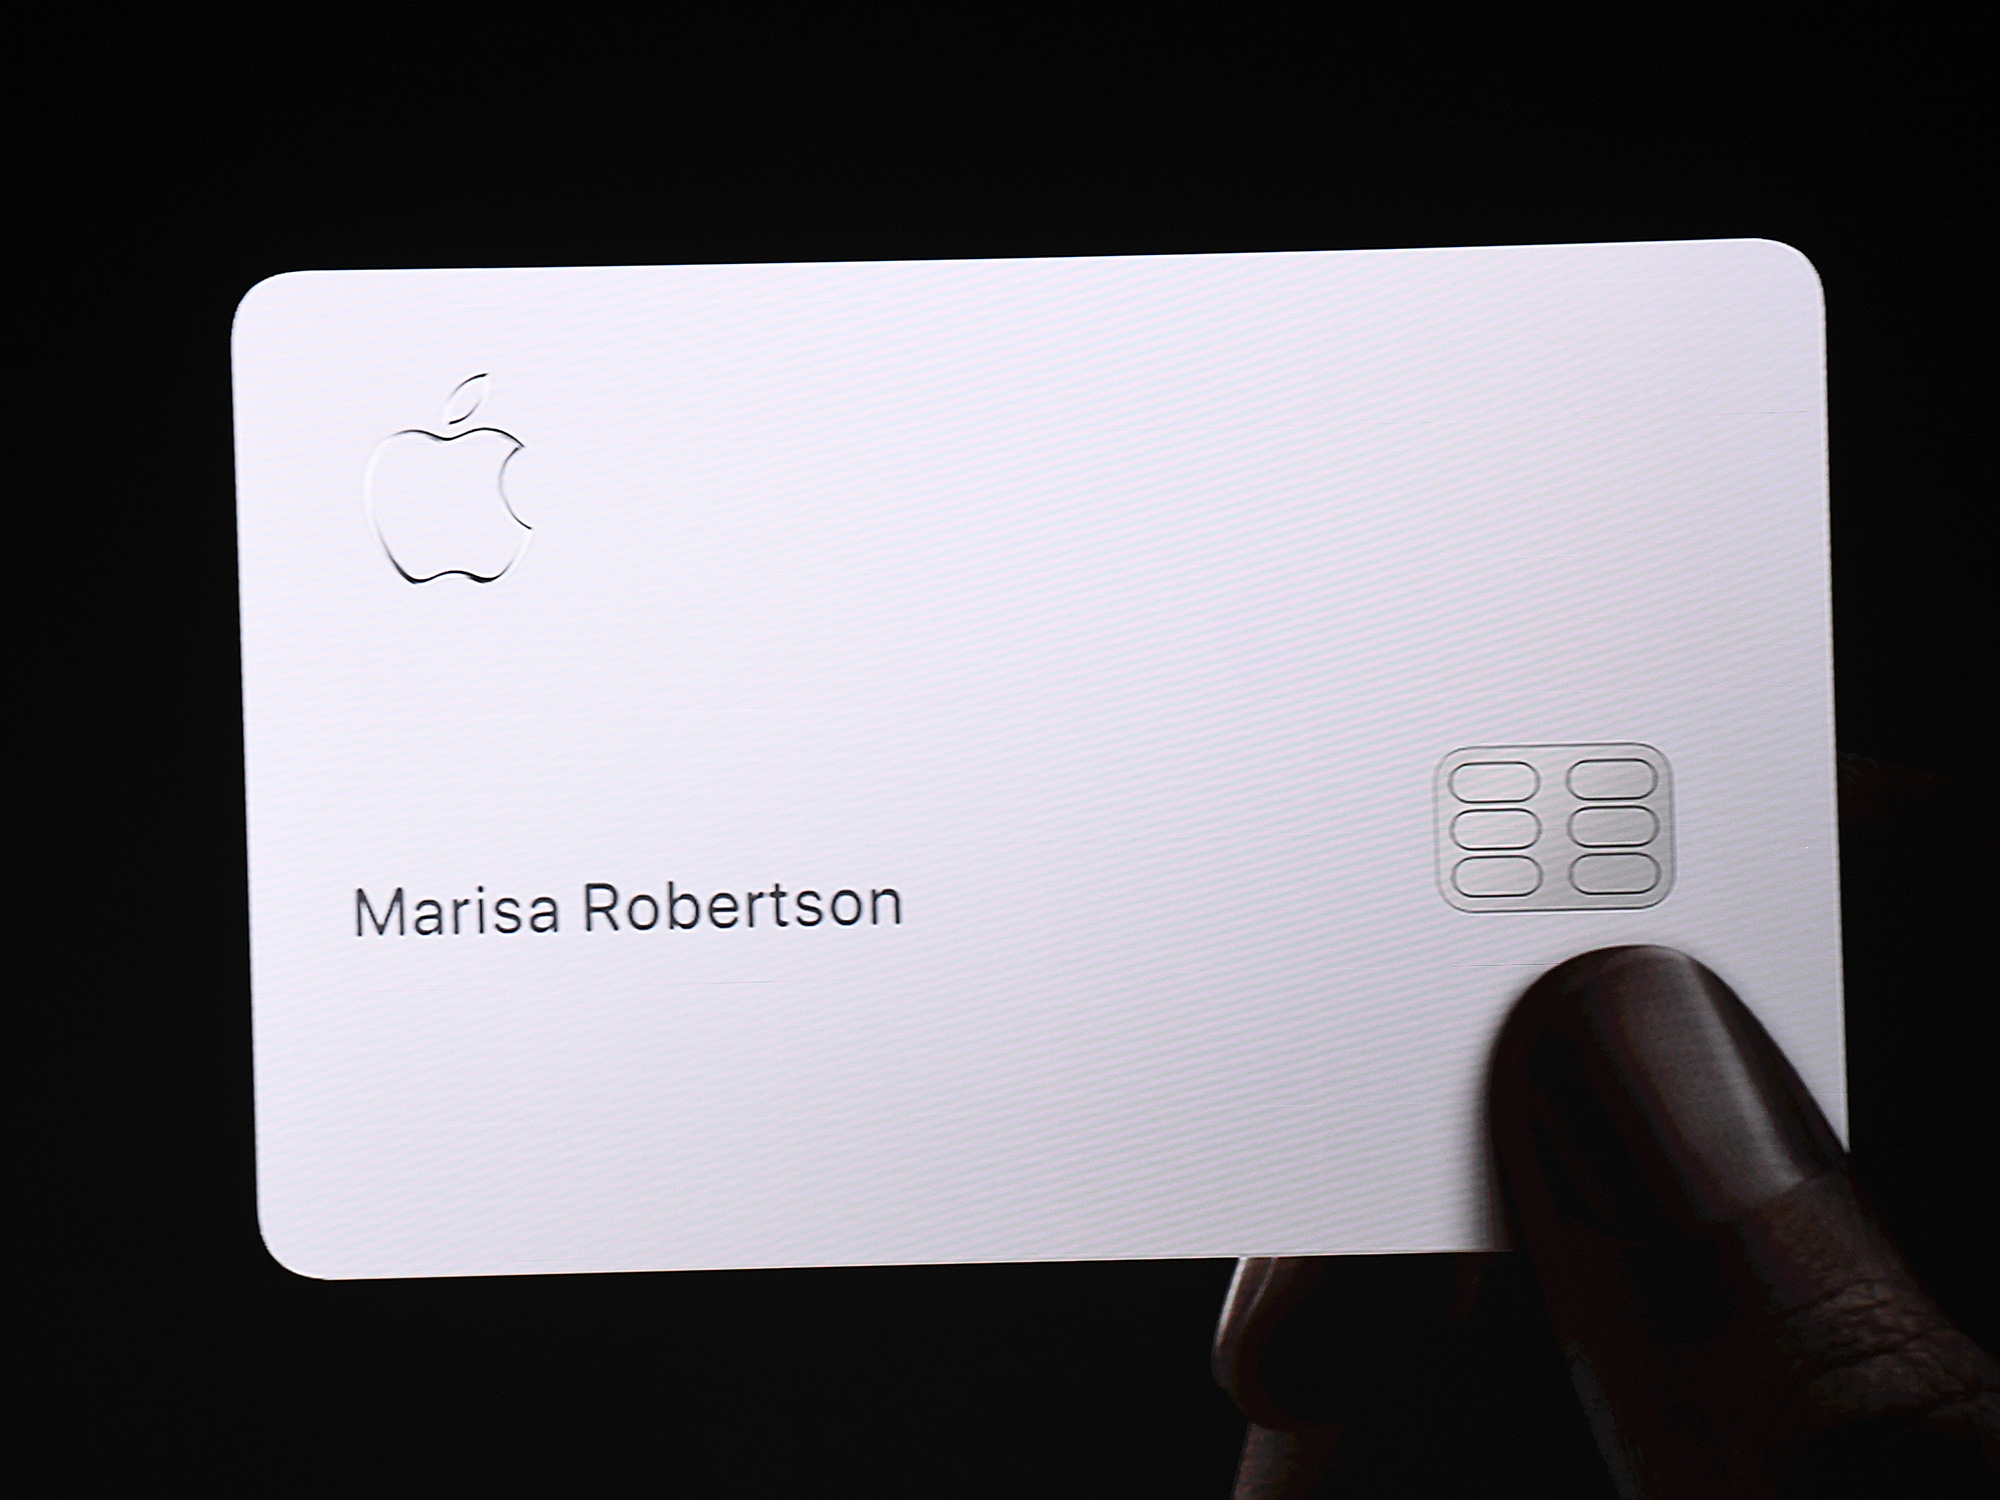 Apple card displayed on screen during an event in Cupertino, California on March 25.